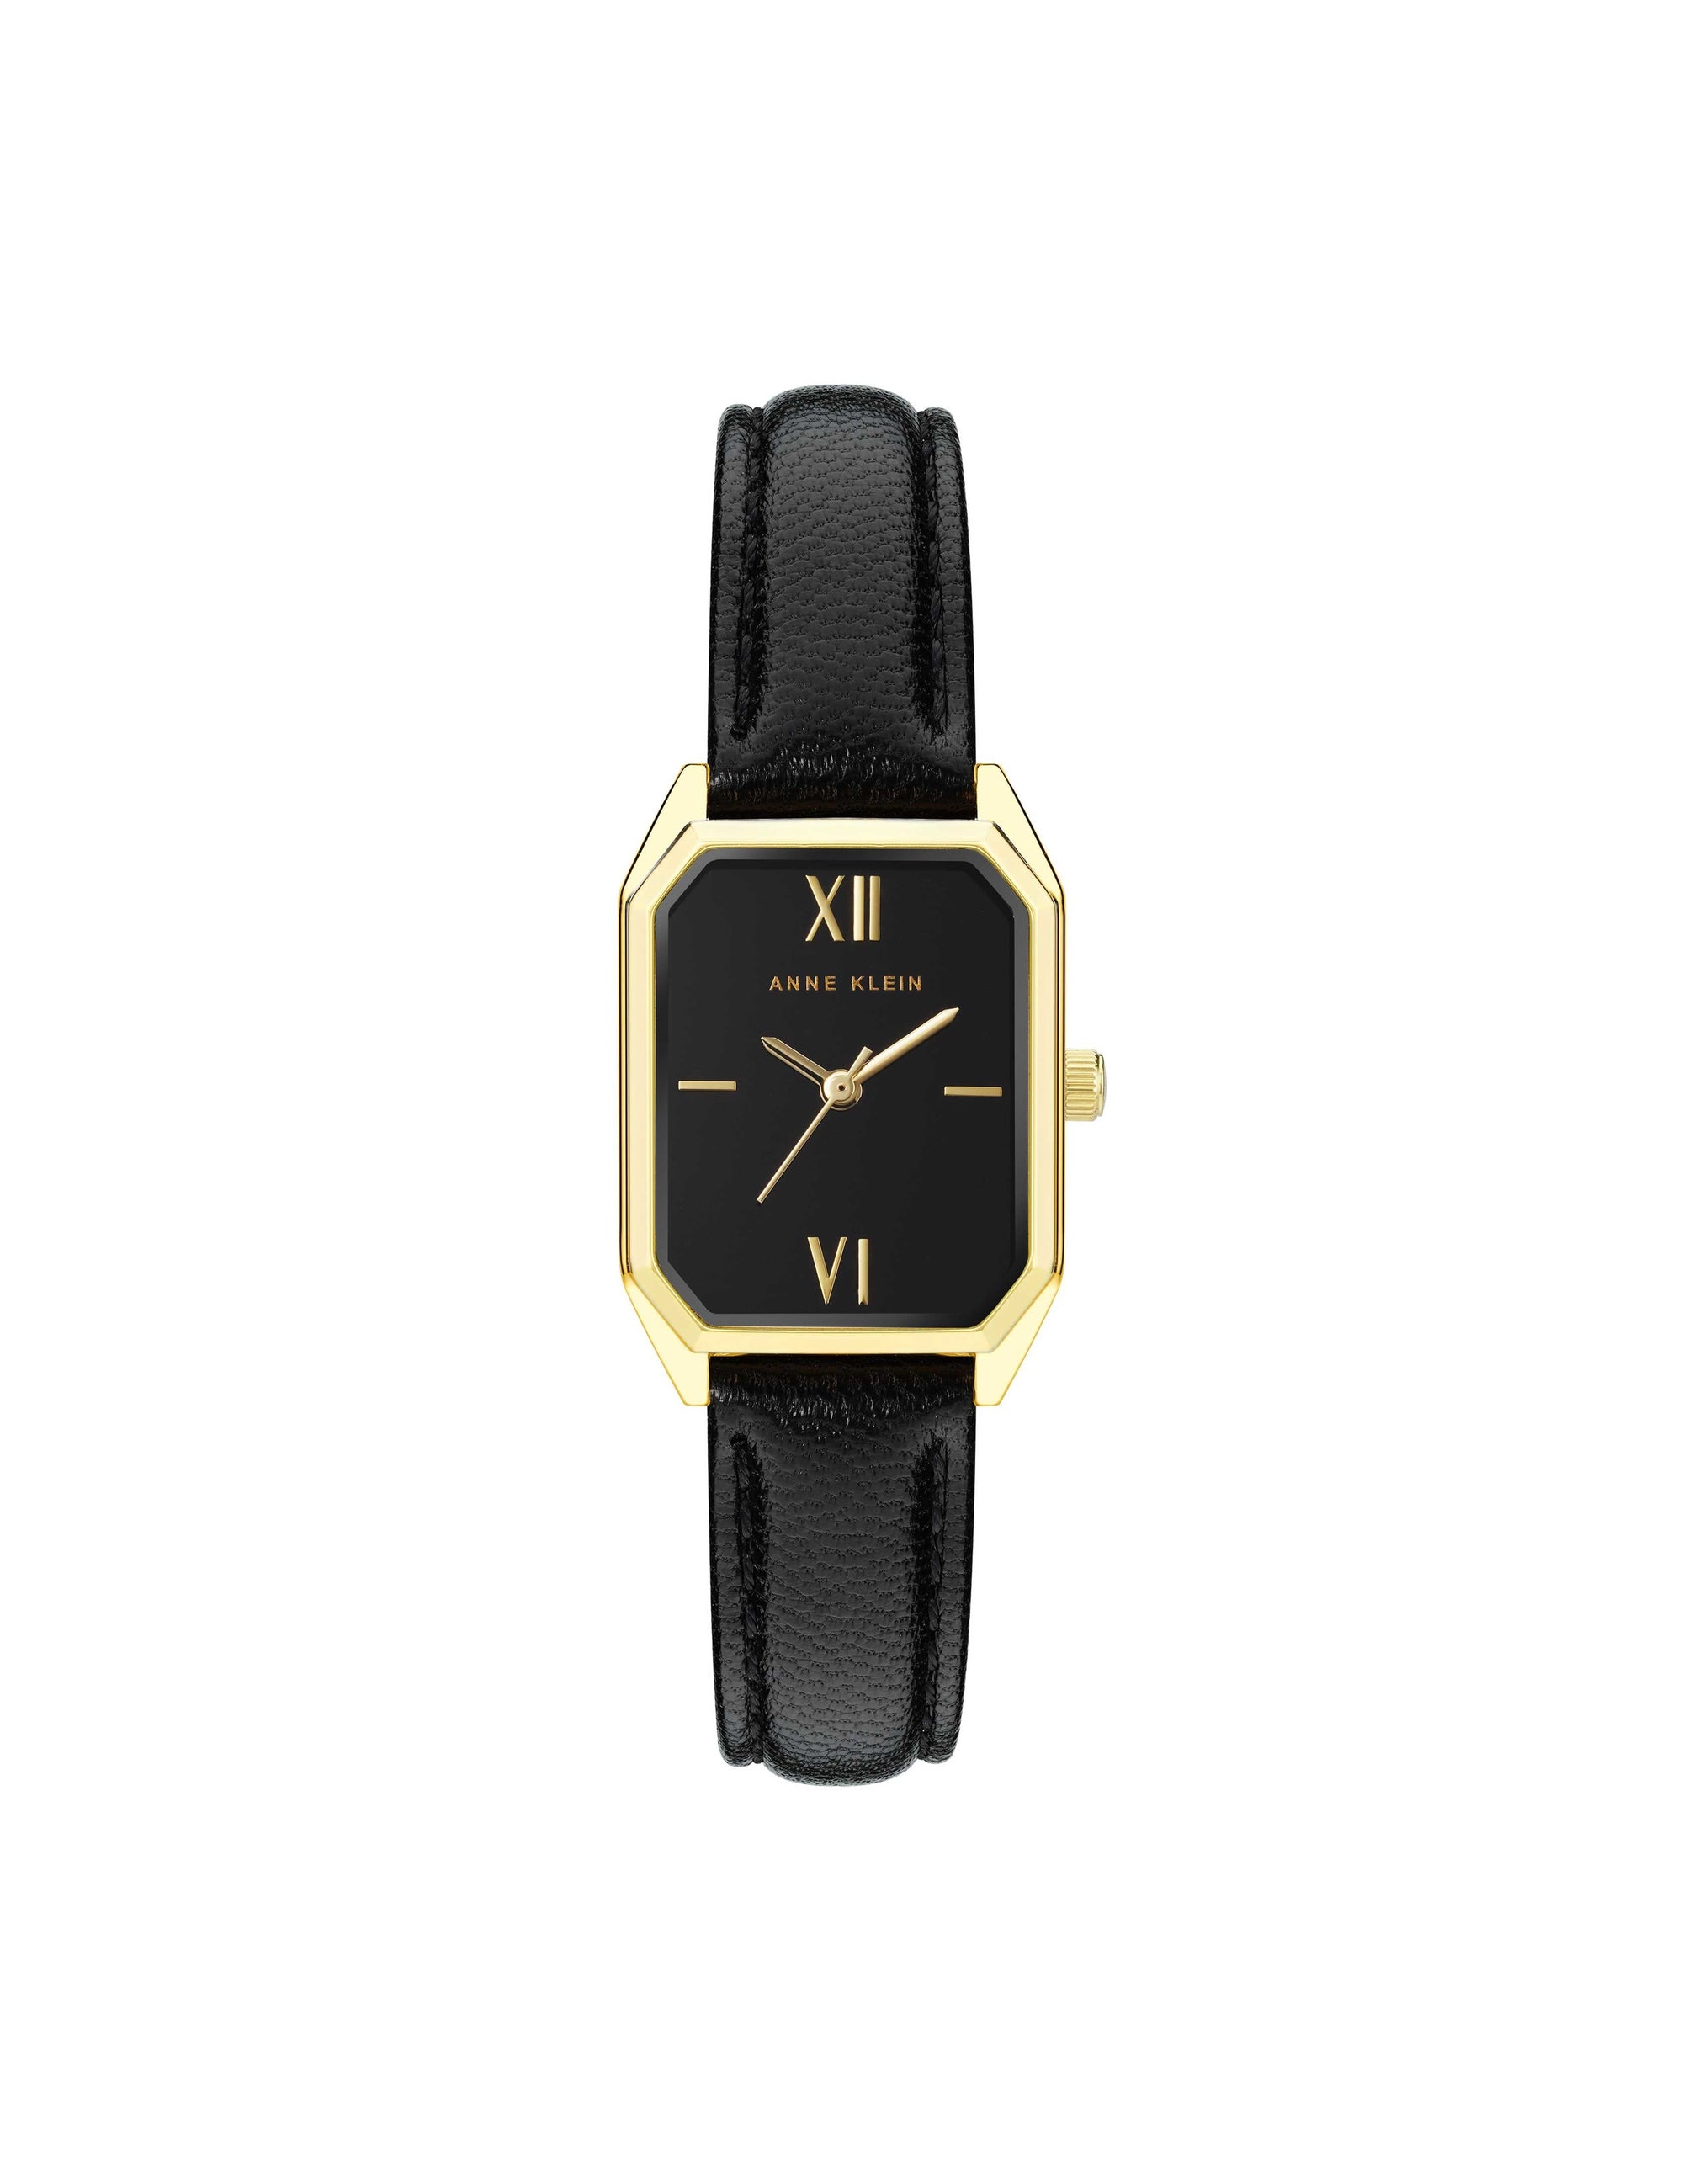 Considered Solar Square Leather Strap Watch Green/Rose Gold-Tone